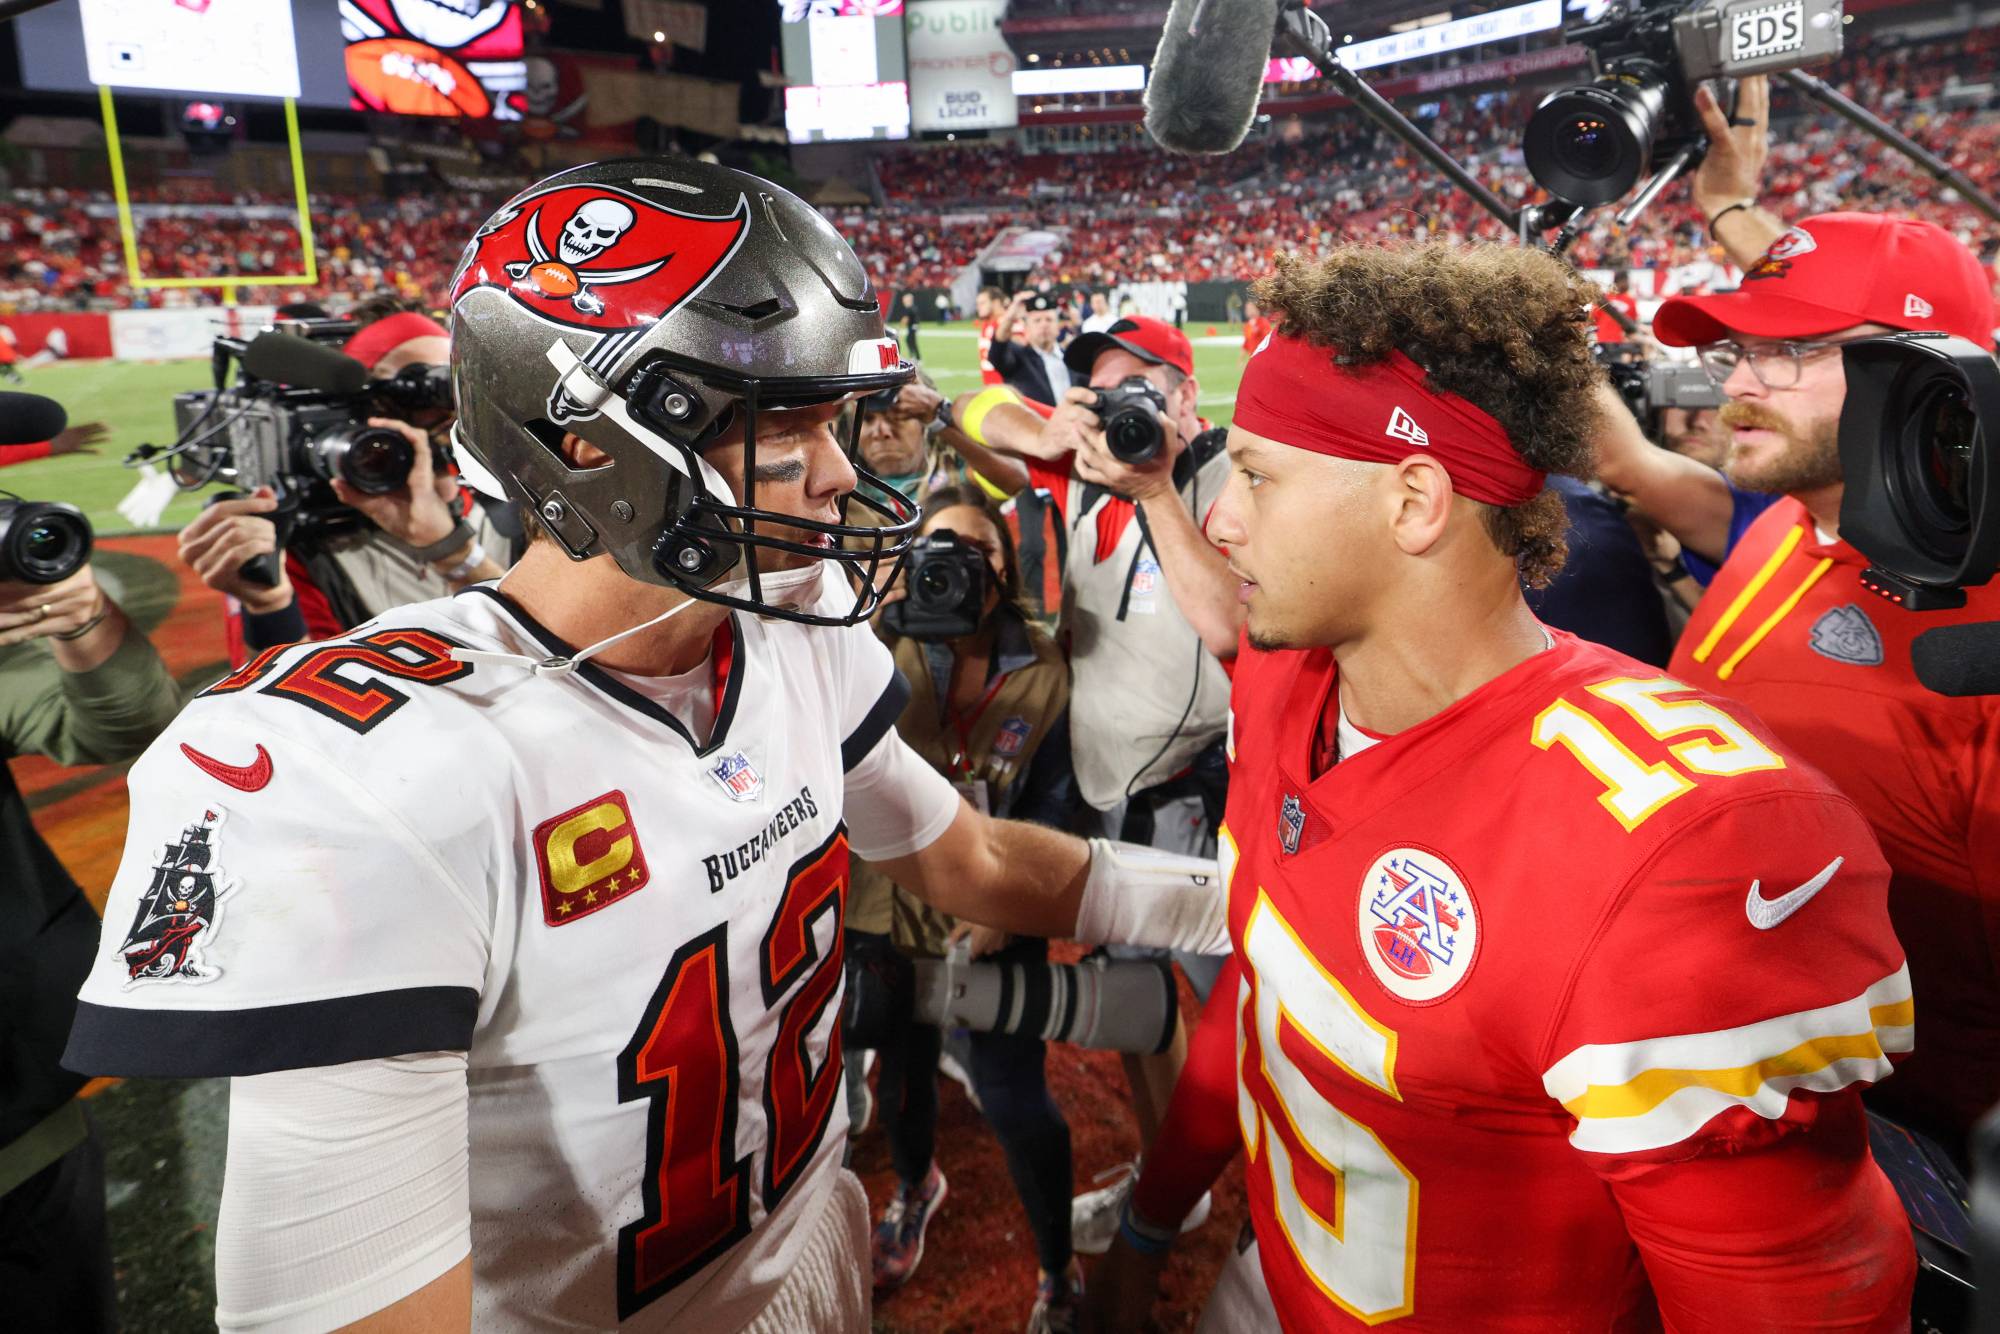 Patrick Mahomes leads Chiefs to win over Buccaneers - The Japan Times